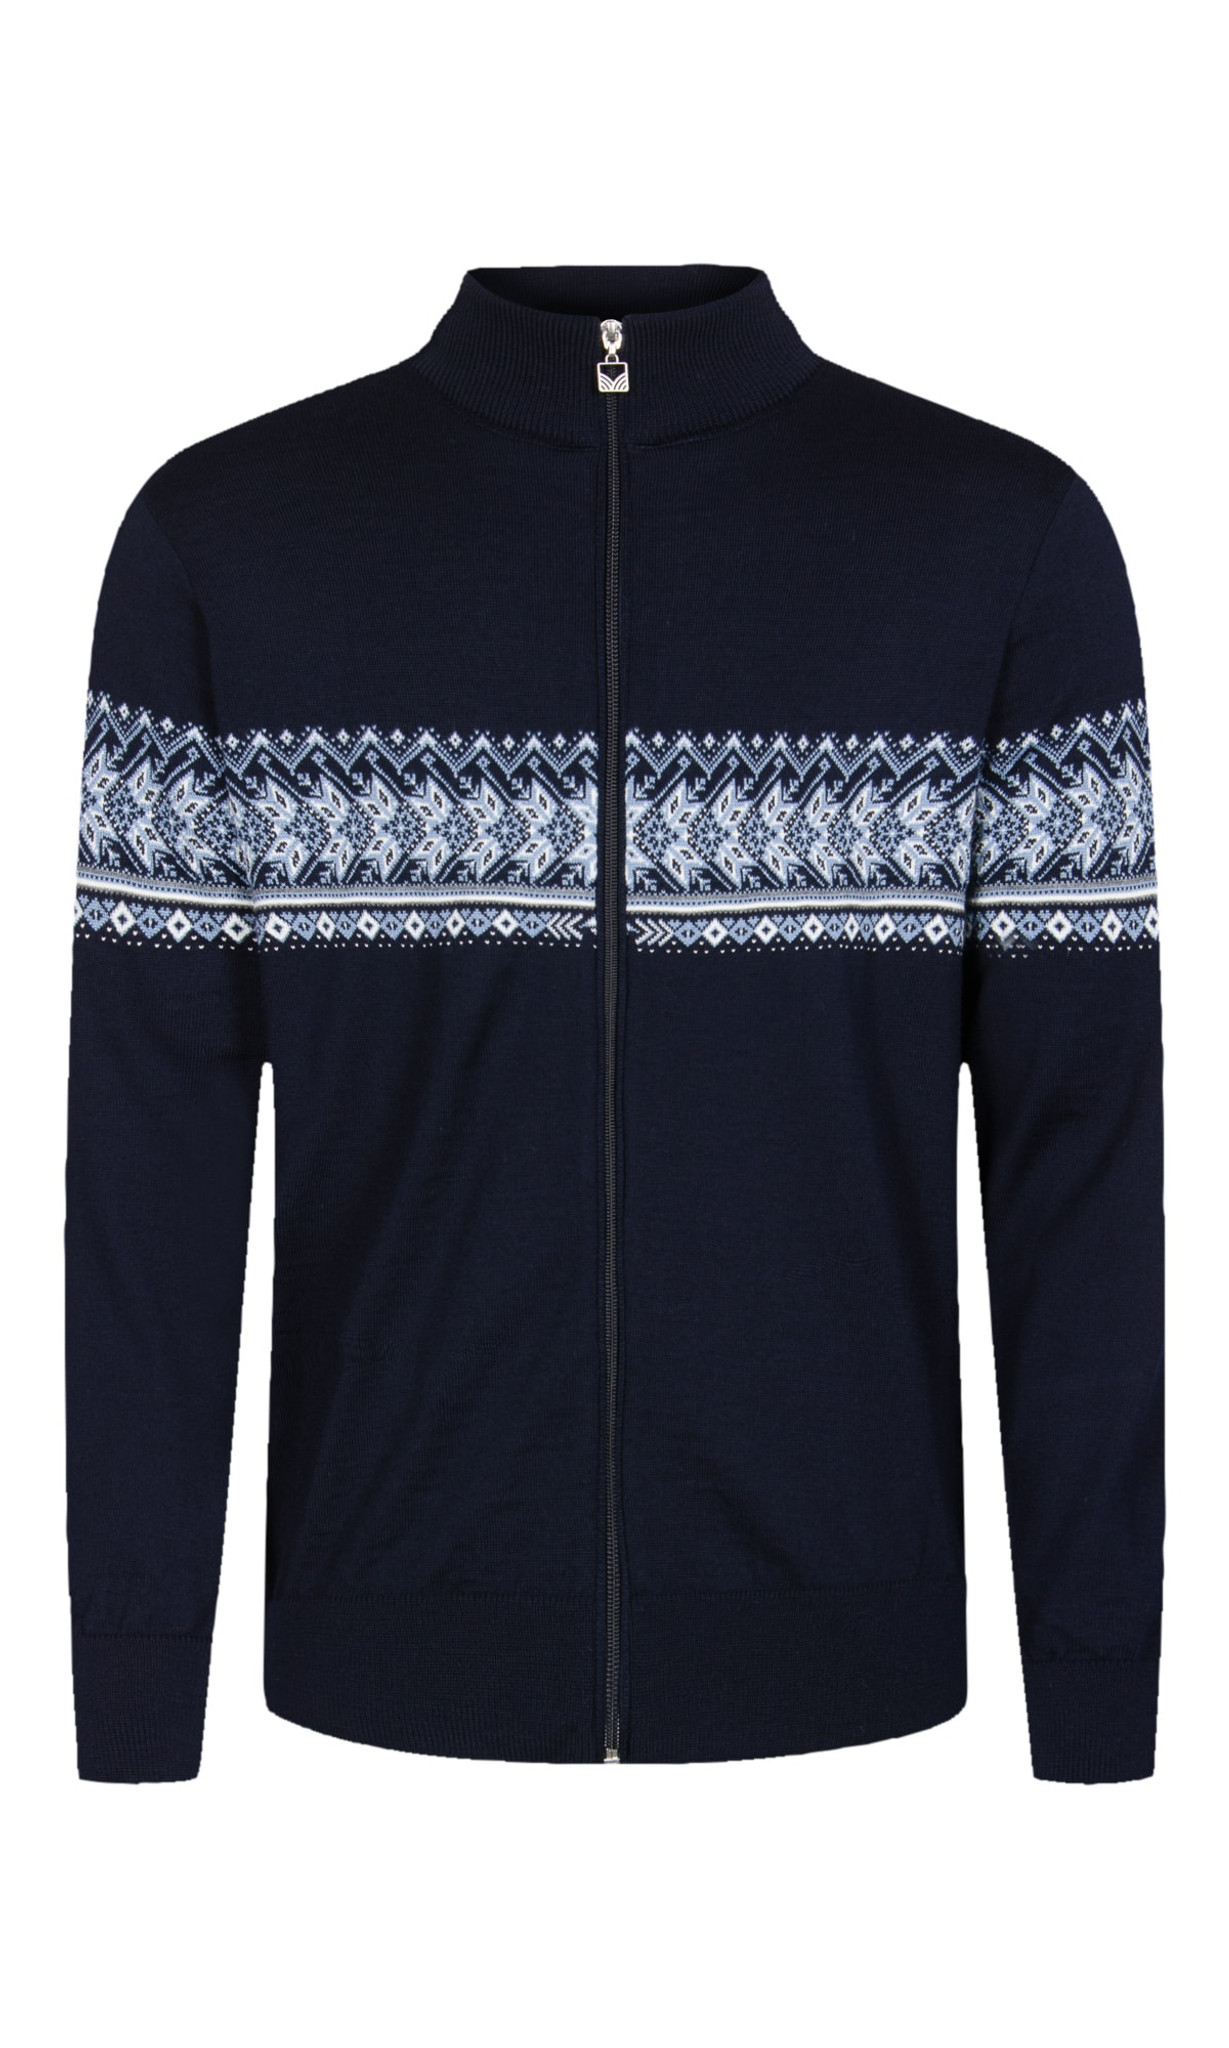 Dale Norway Men's Navy/Off White/Blue Shadow, | The Nordic Shop